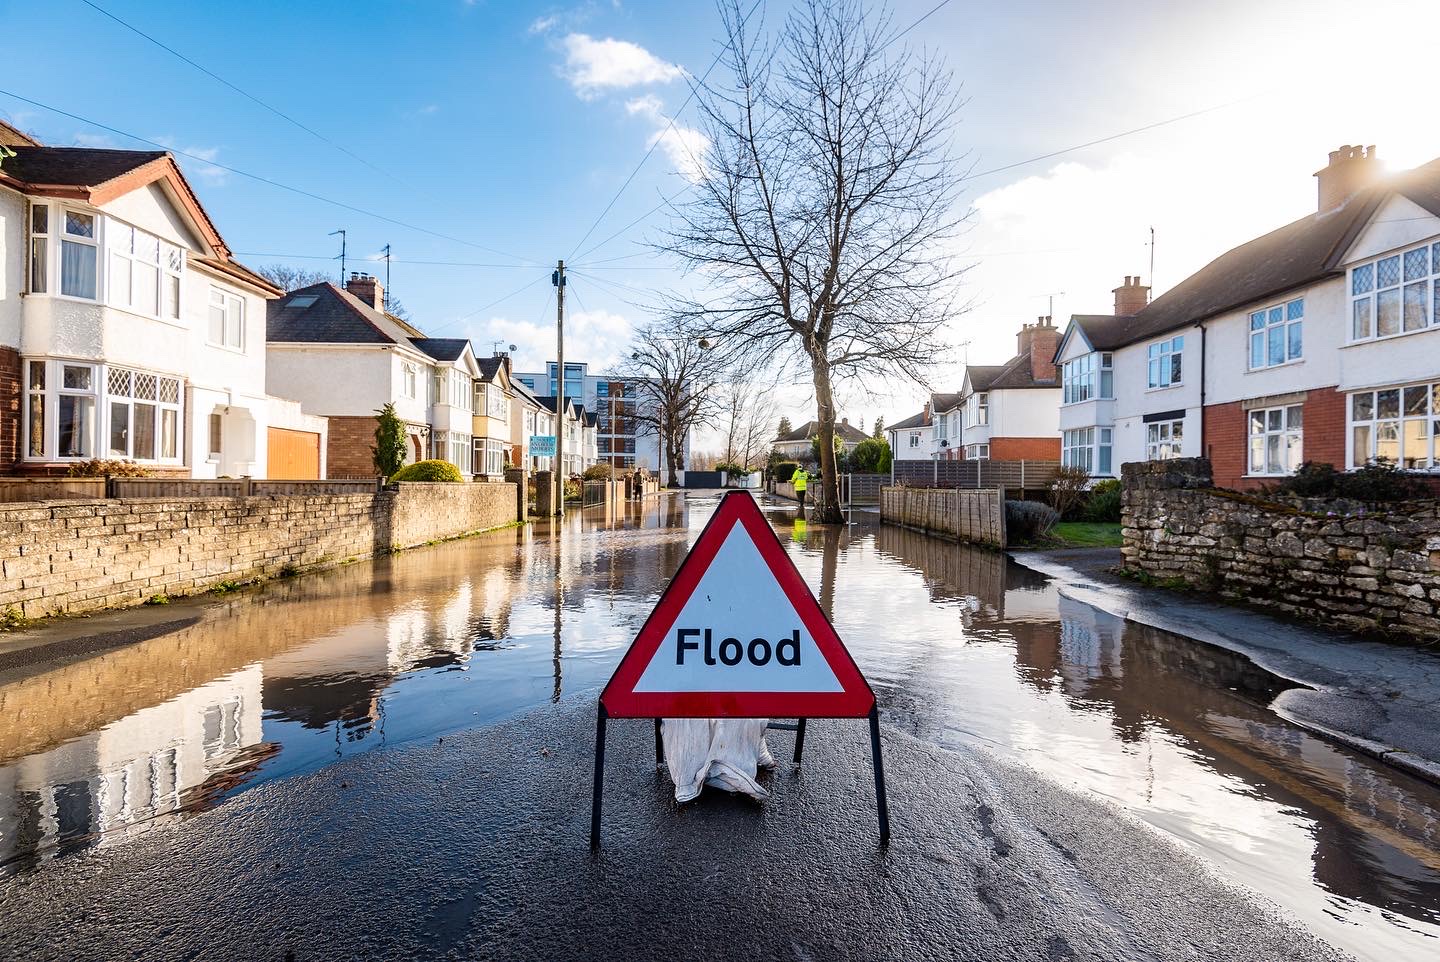 NEWS | Flood alerts remain in force but it’s an improving picture across Herefordshire this morning